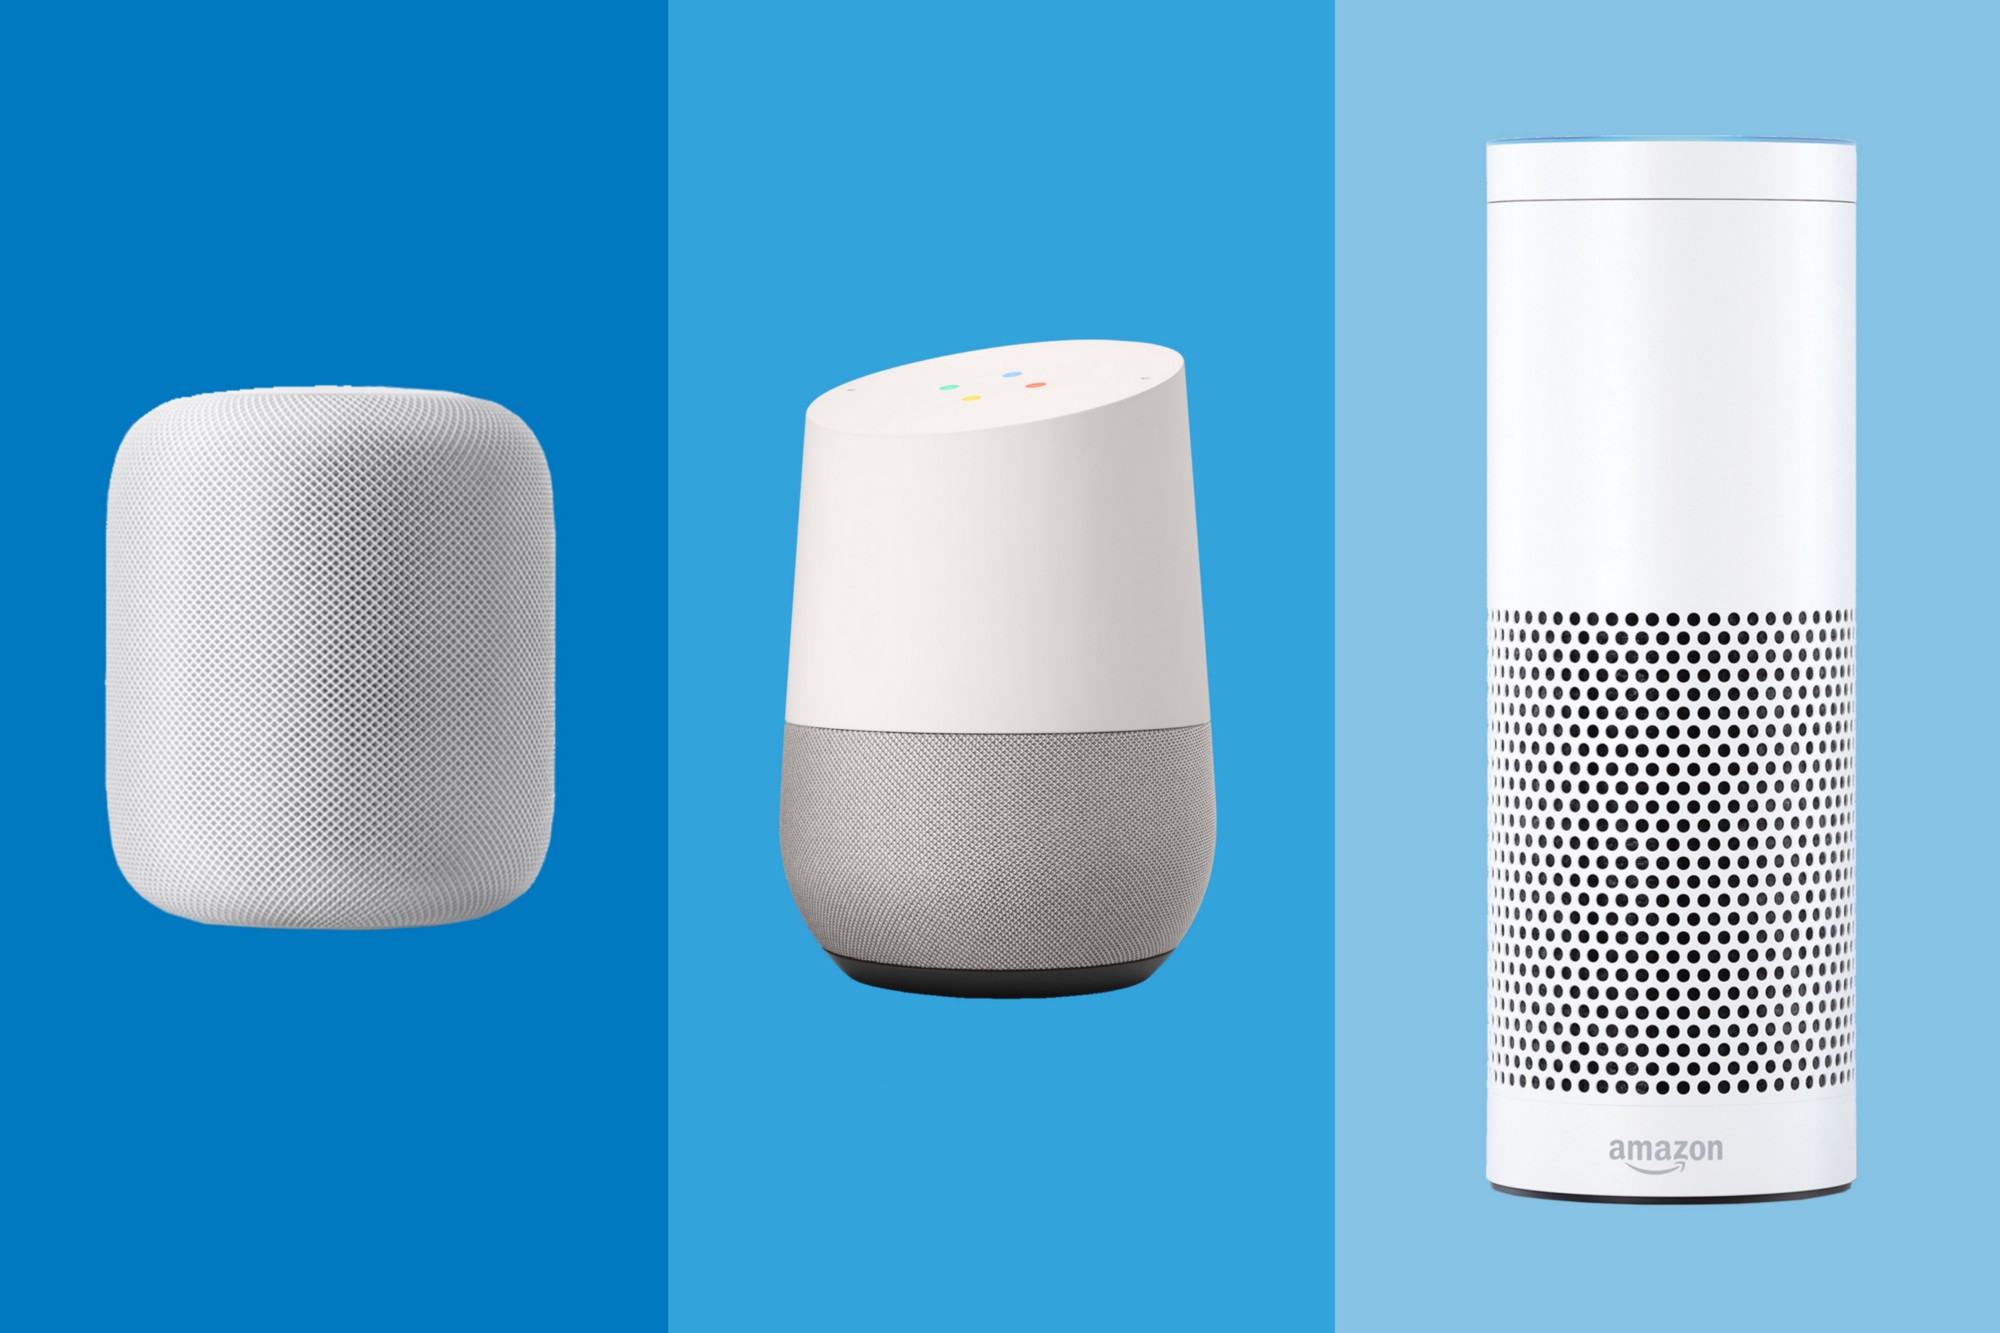 chatbot trends: home assistant devices